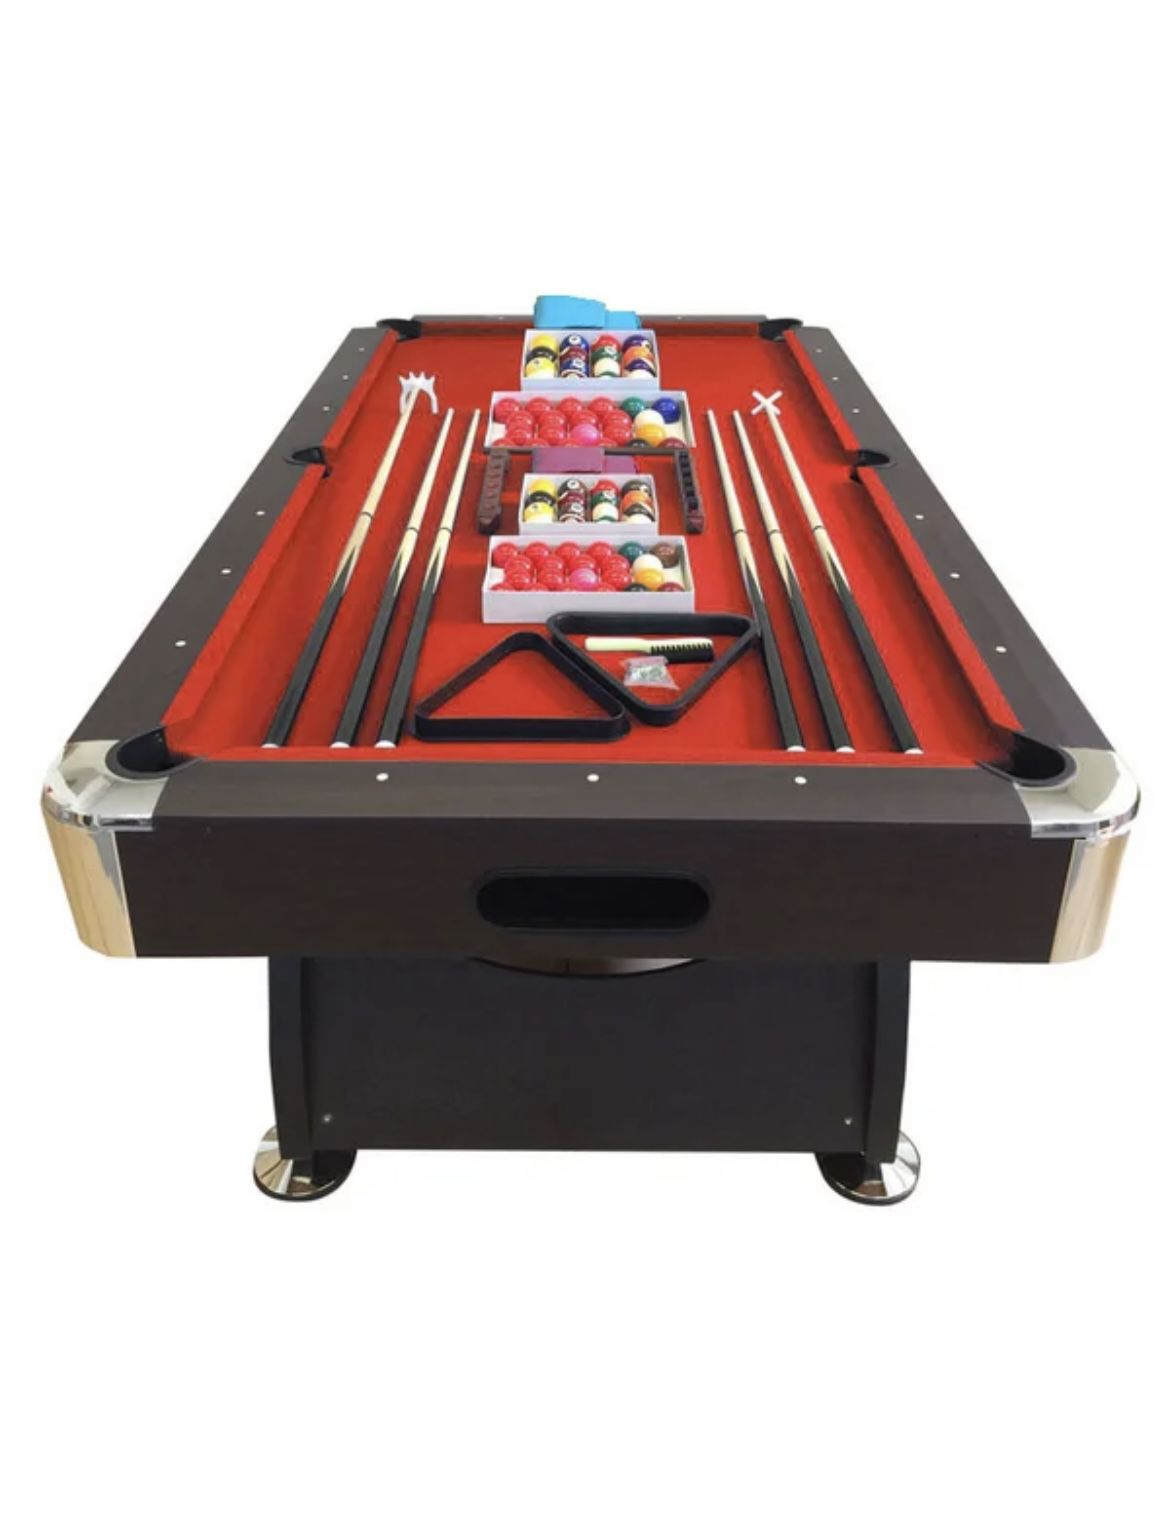 7ft Red Pool Table Brand New 